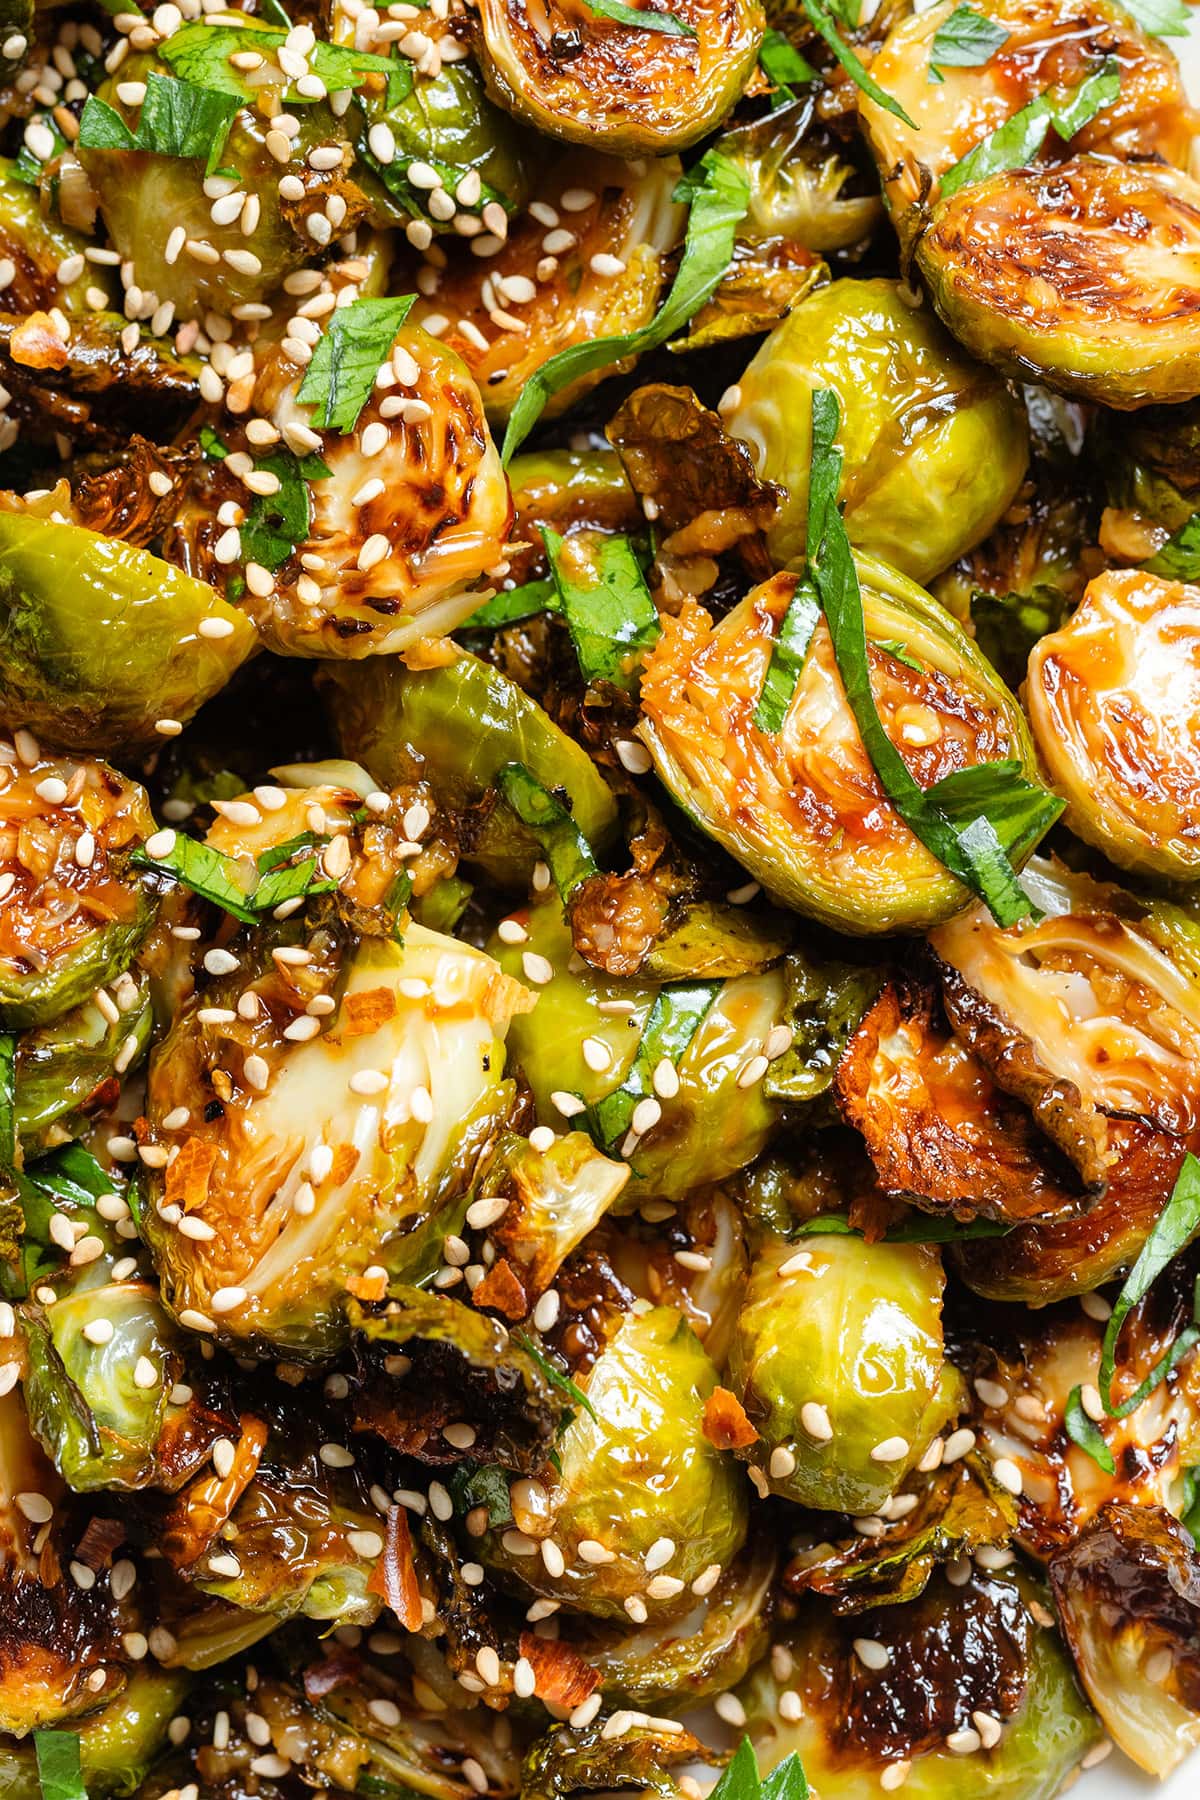 Roasted brussels sprouts topped with fresh parsley and sesame seeds.